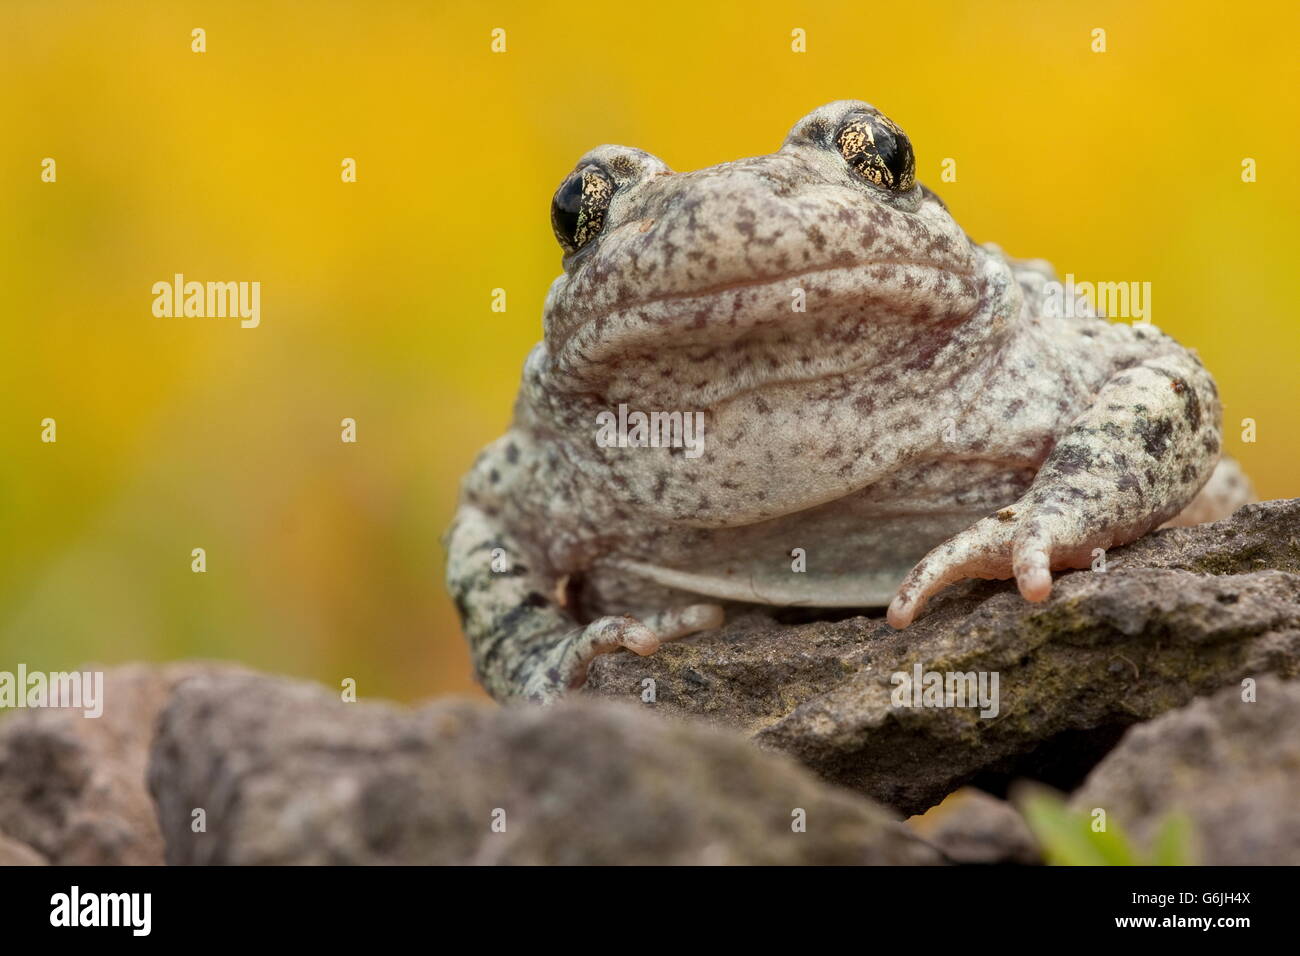 common midwife toad, Germany / (Alytes obstetricans) Stock Photo